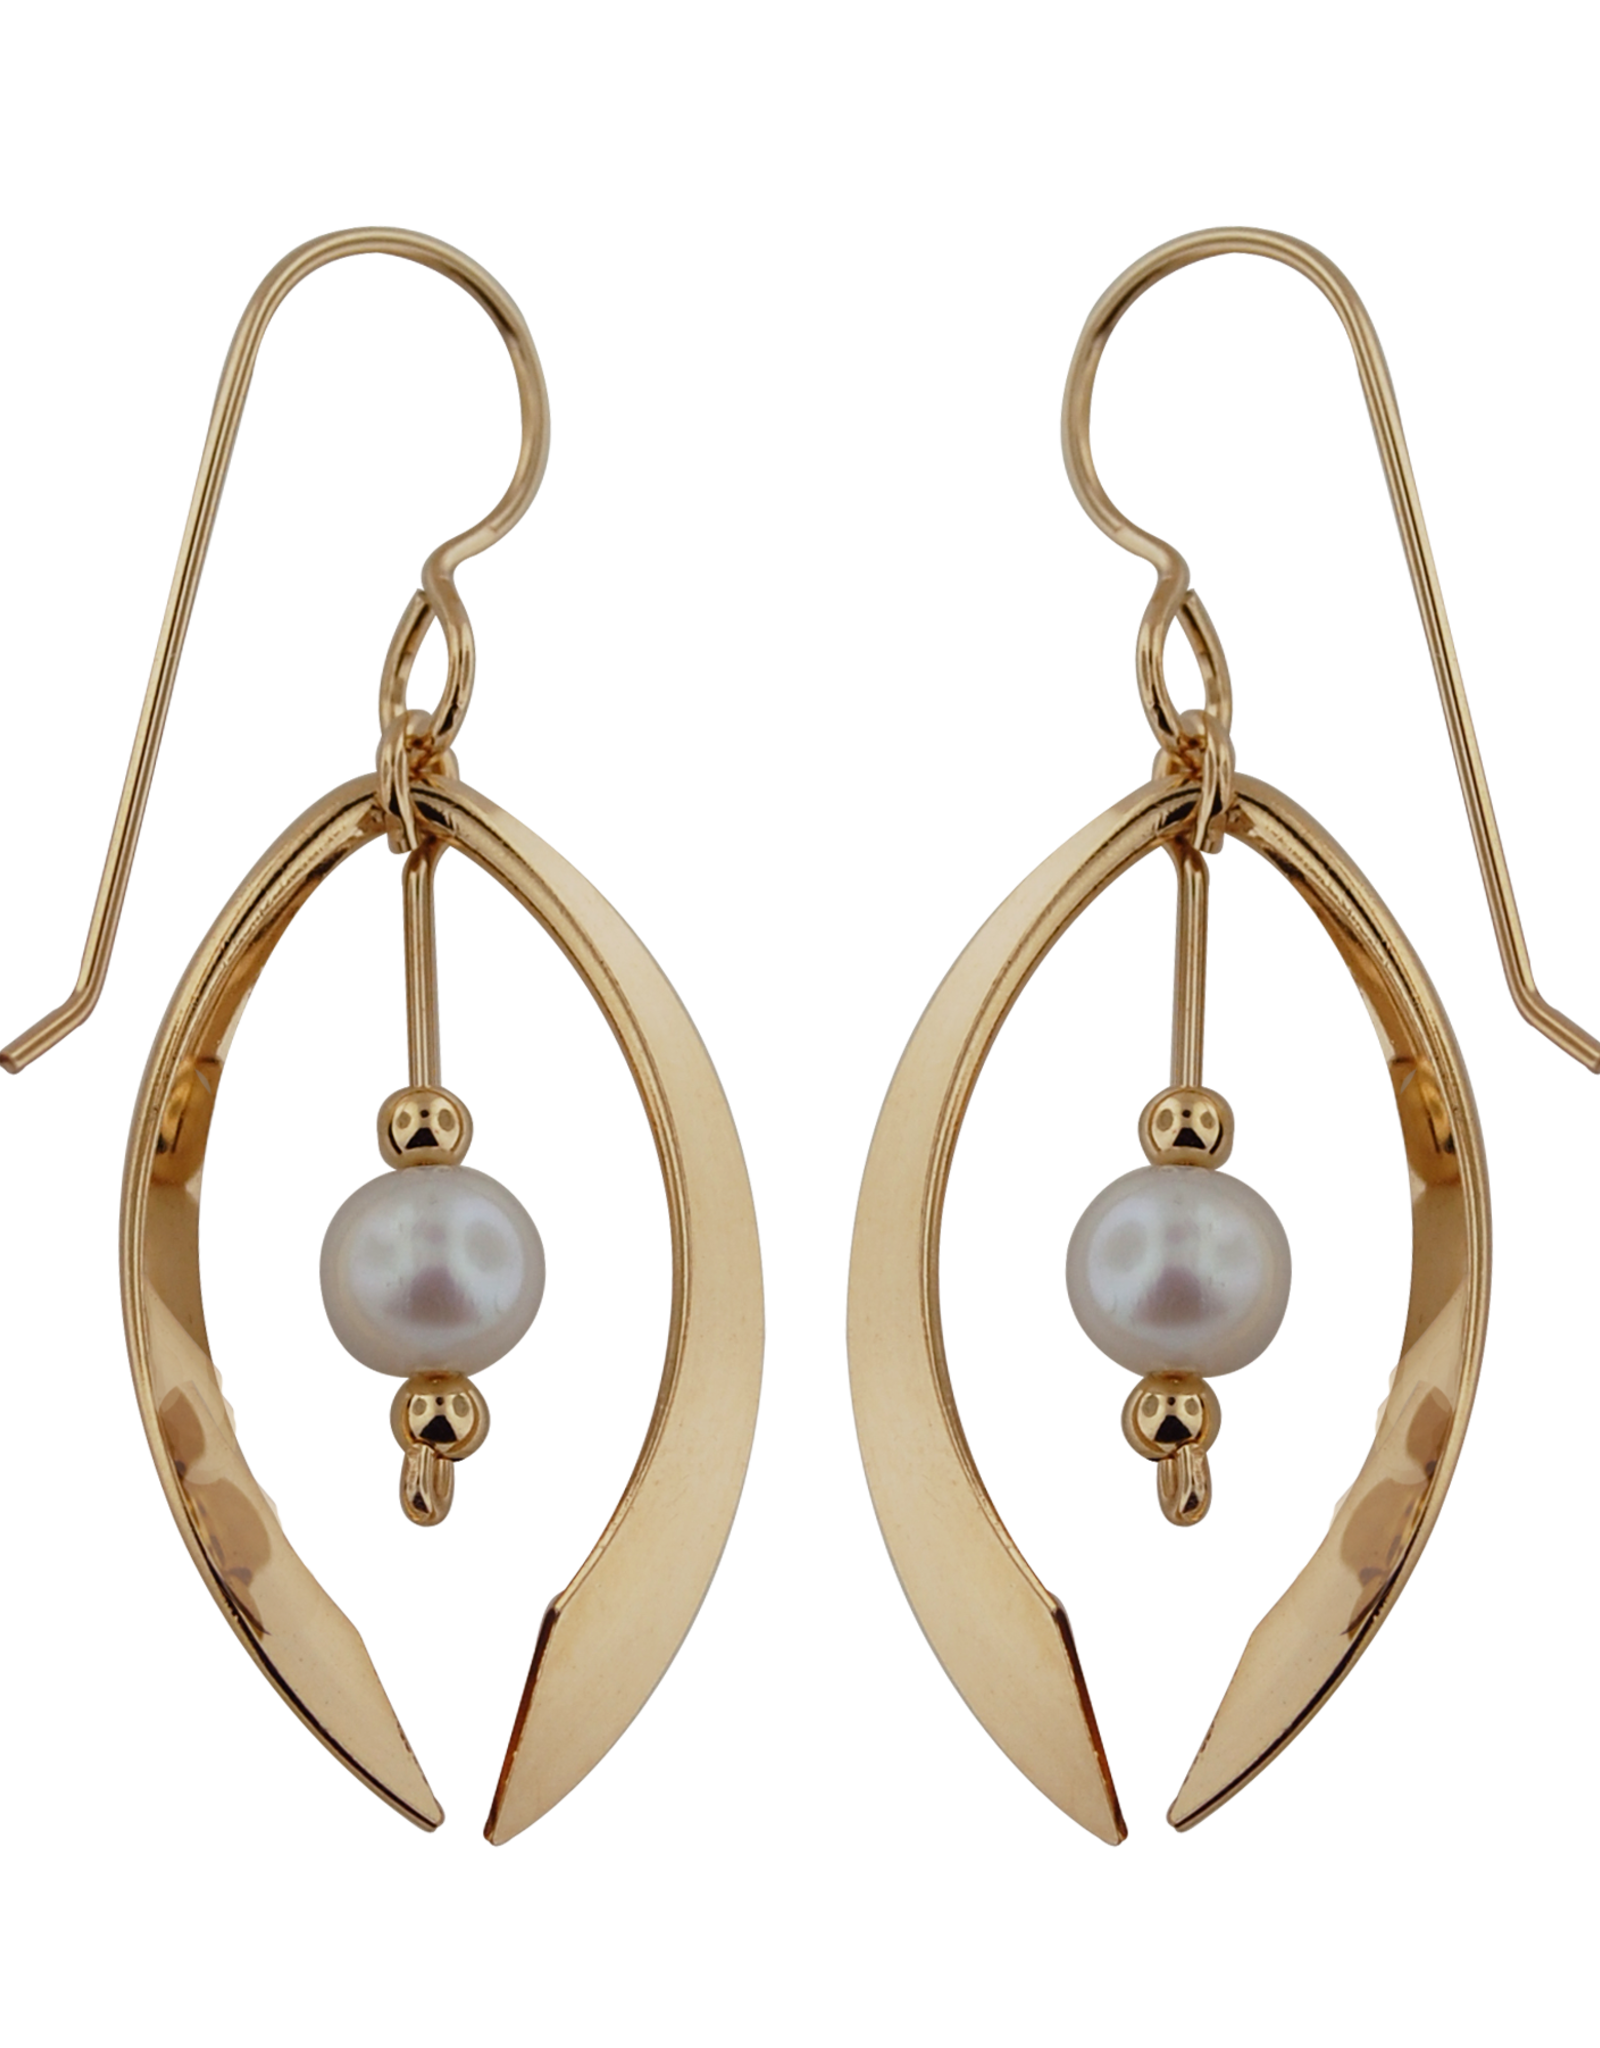 B&R Designs by Nilsson Gold-filled Marquise Wishbone Earrings with Pearl #2044G